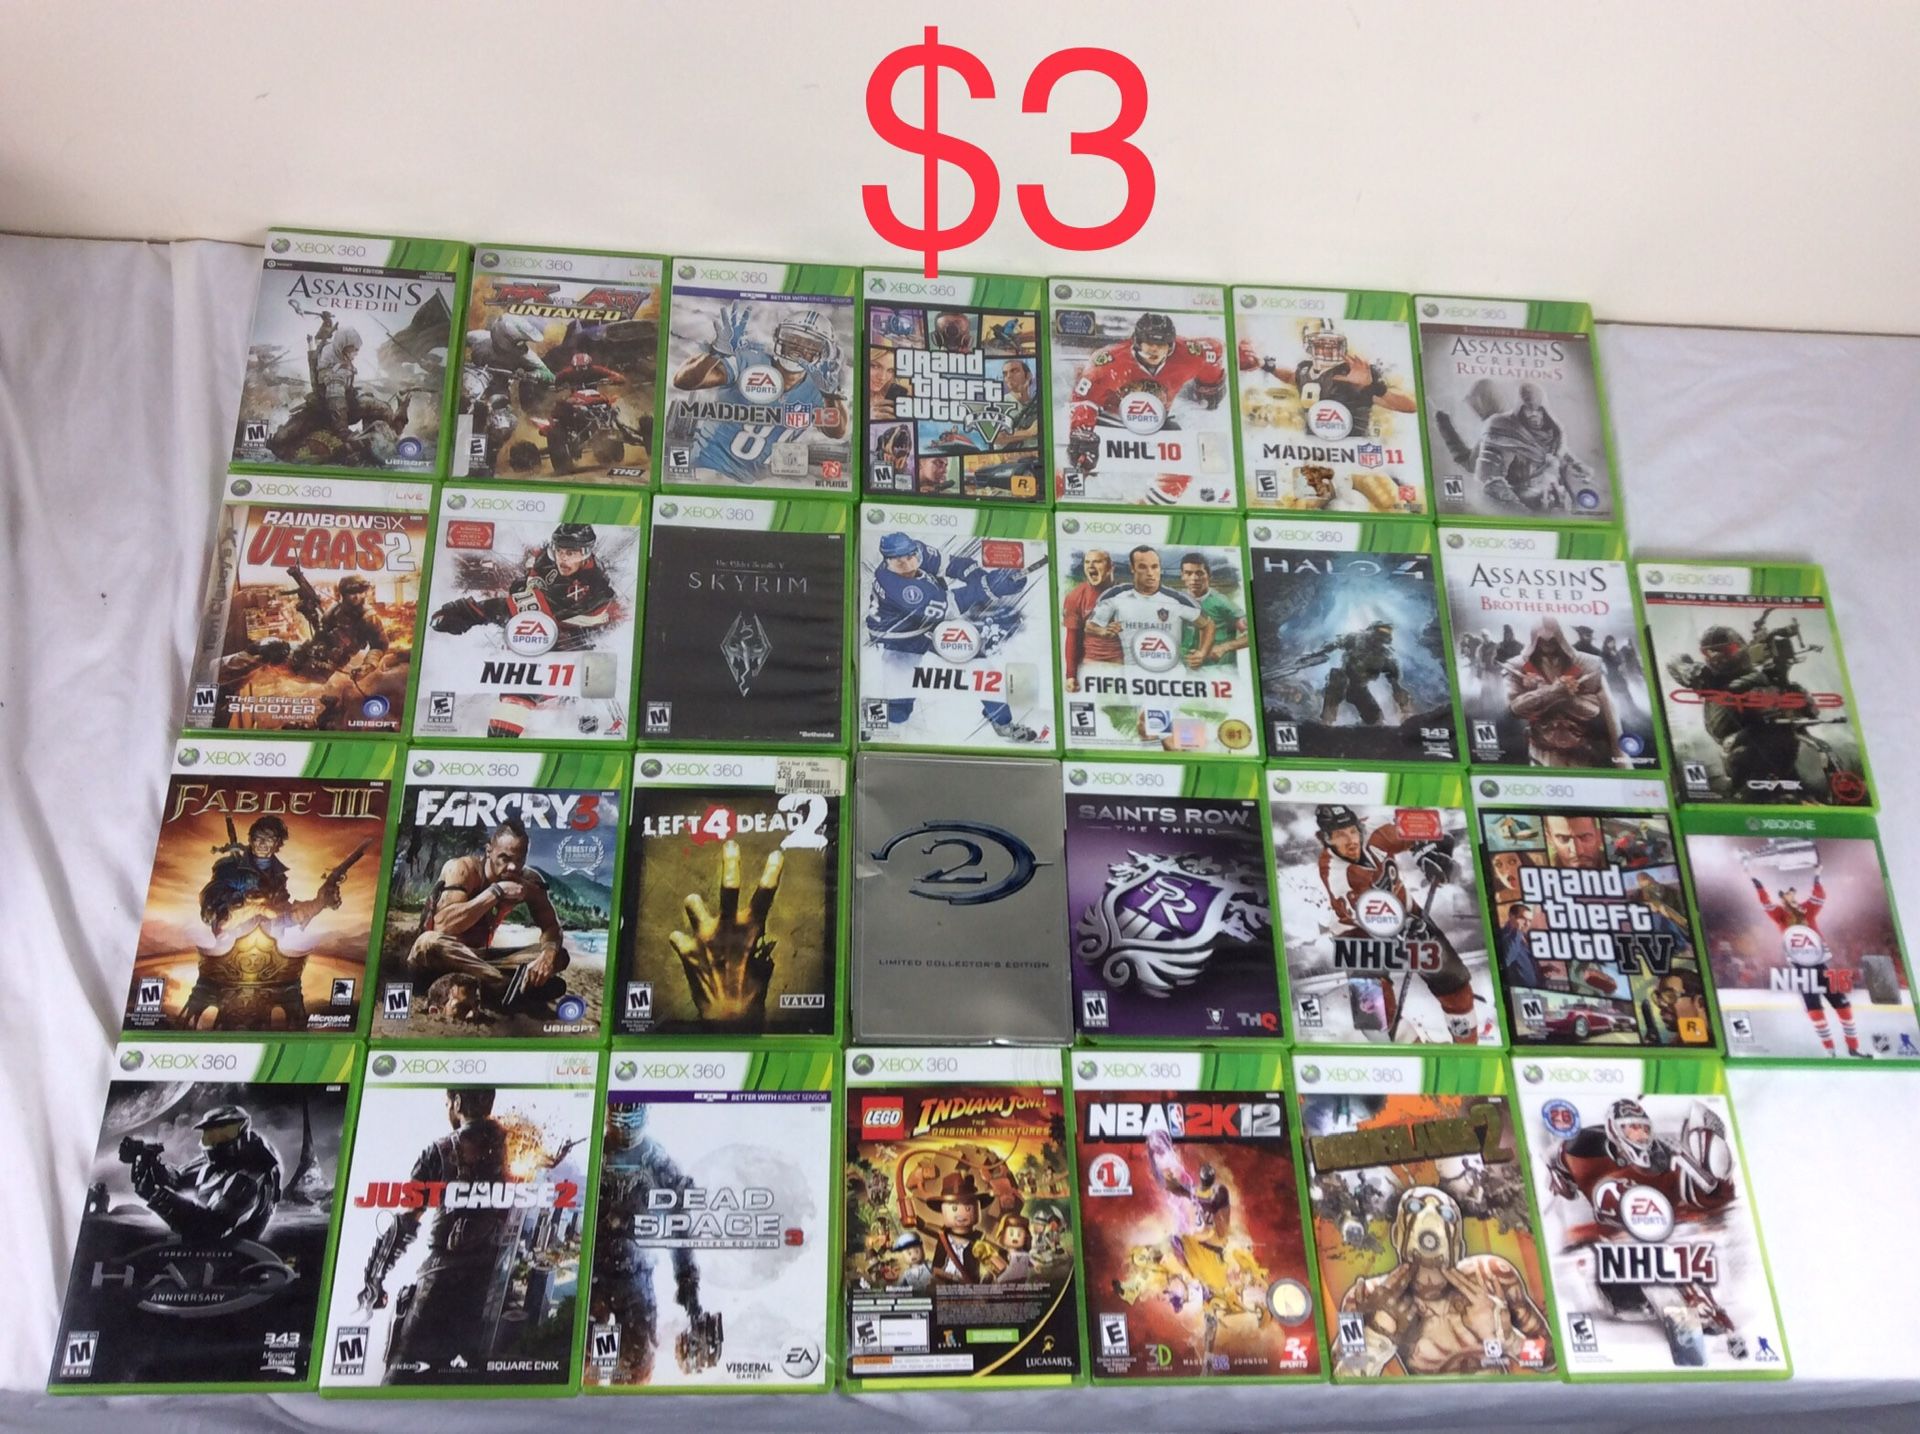 Collection of Xbox 360 Video Games for $3 Each